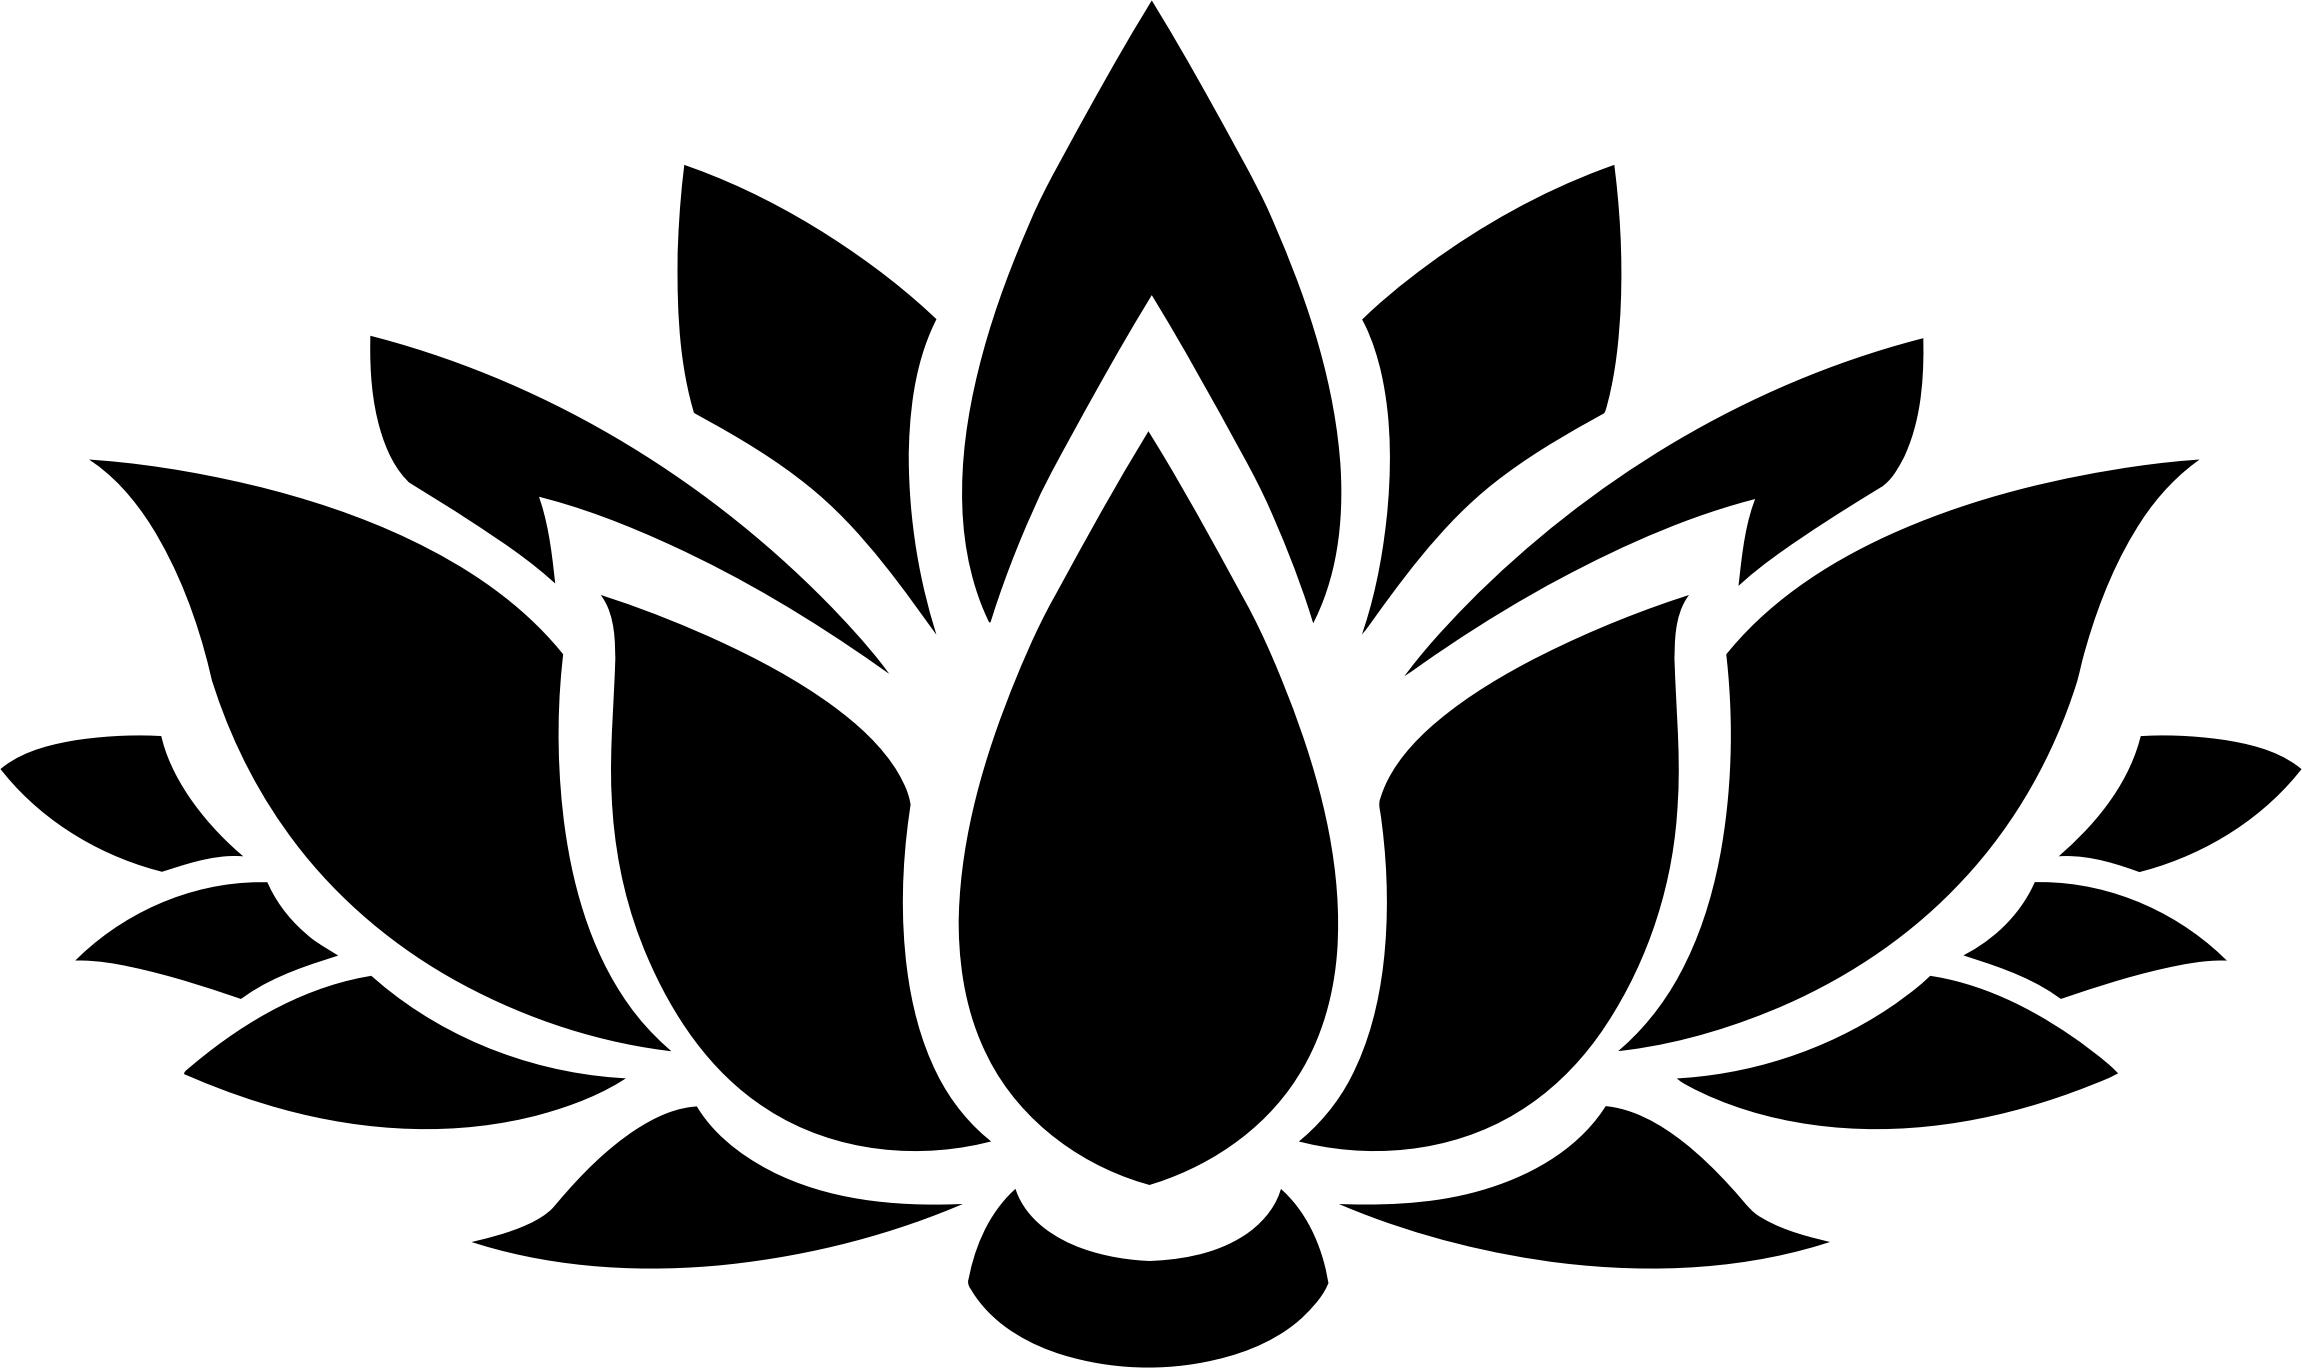 Lotus Flower Silhouette 6 PNG icons